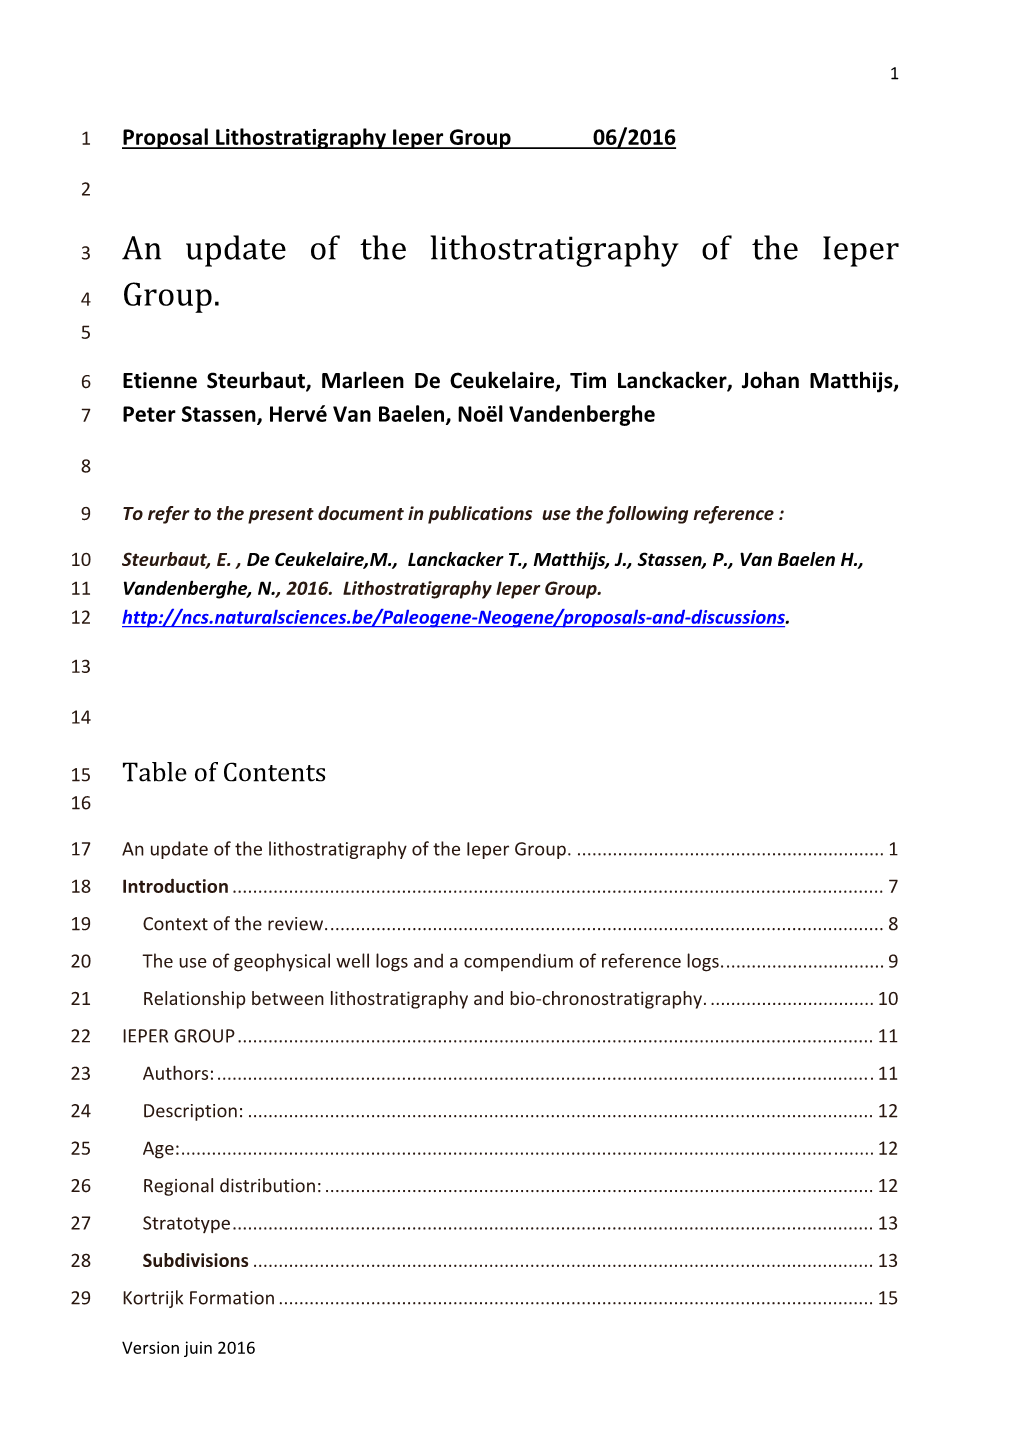 An Update of the Lithostratigraphy of the Ieper Group